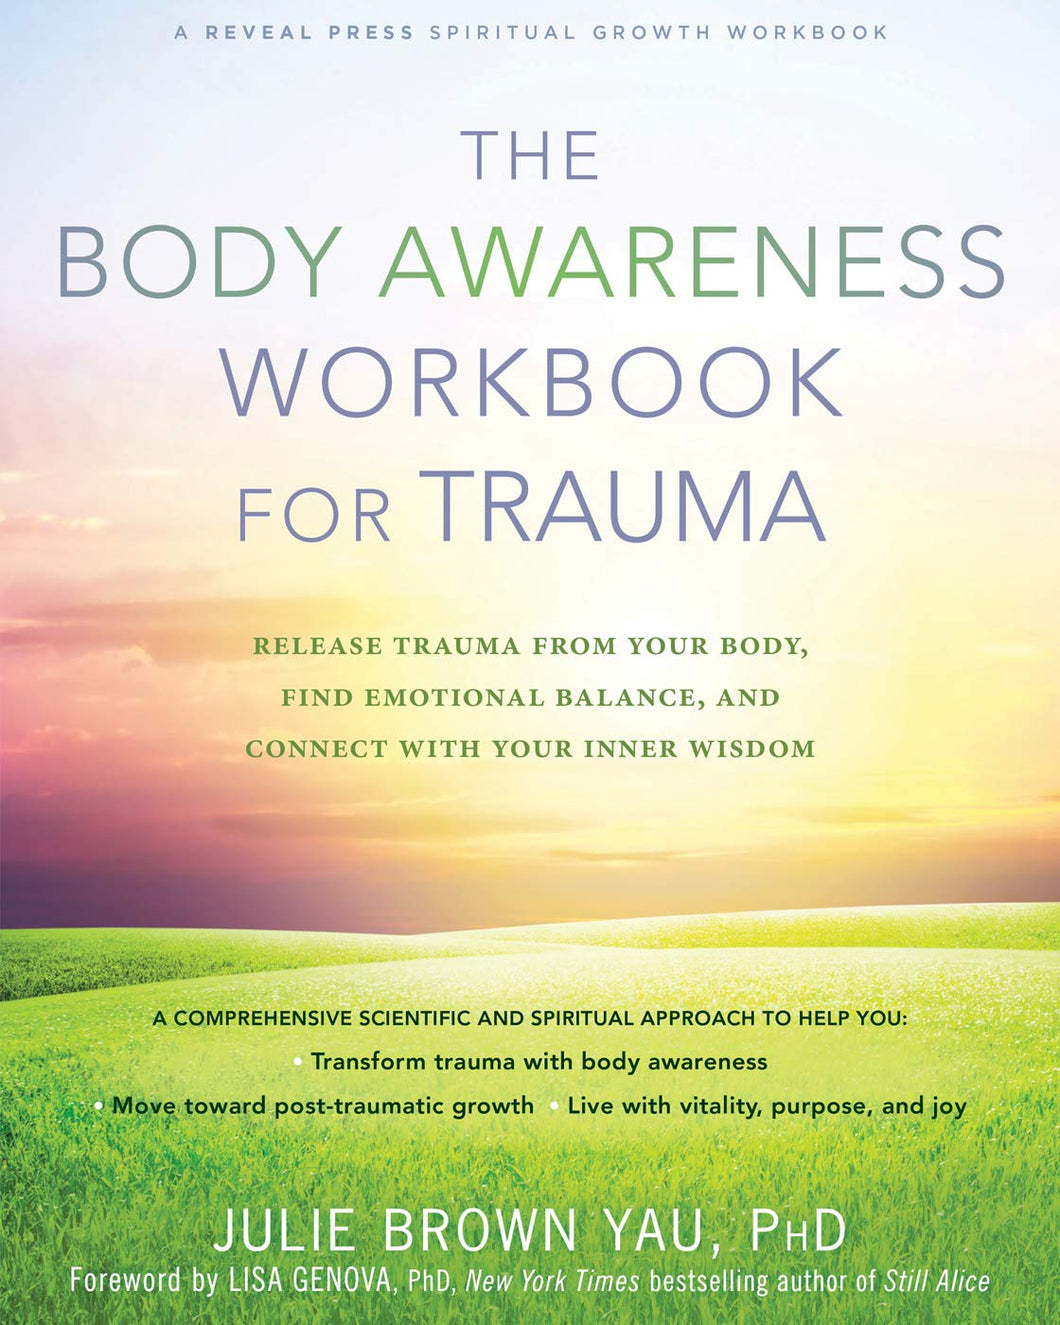 The Body Awareness Workbook For Trauma: Release Trauma From Your Body, Find Emotional Balance, and Connect with Your Inner Wisdom [Julie Brown Yau]